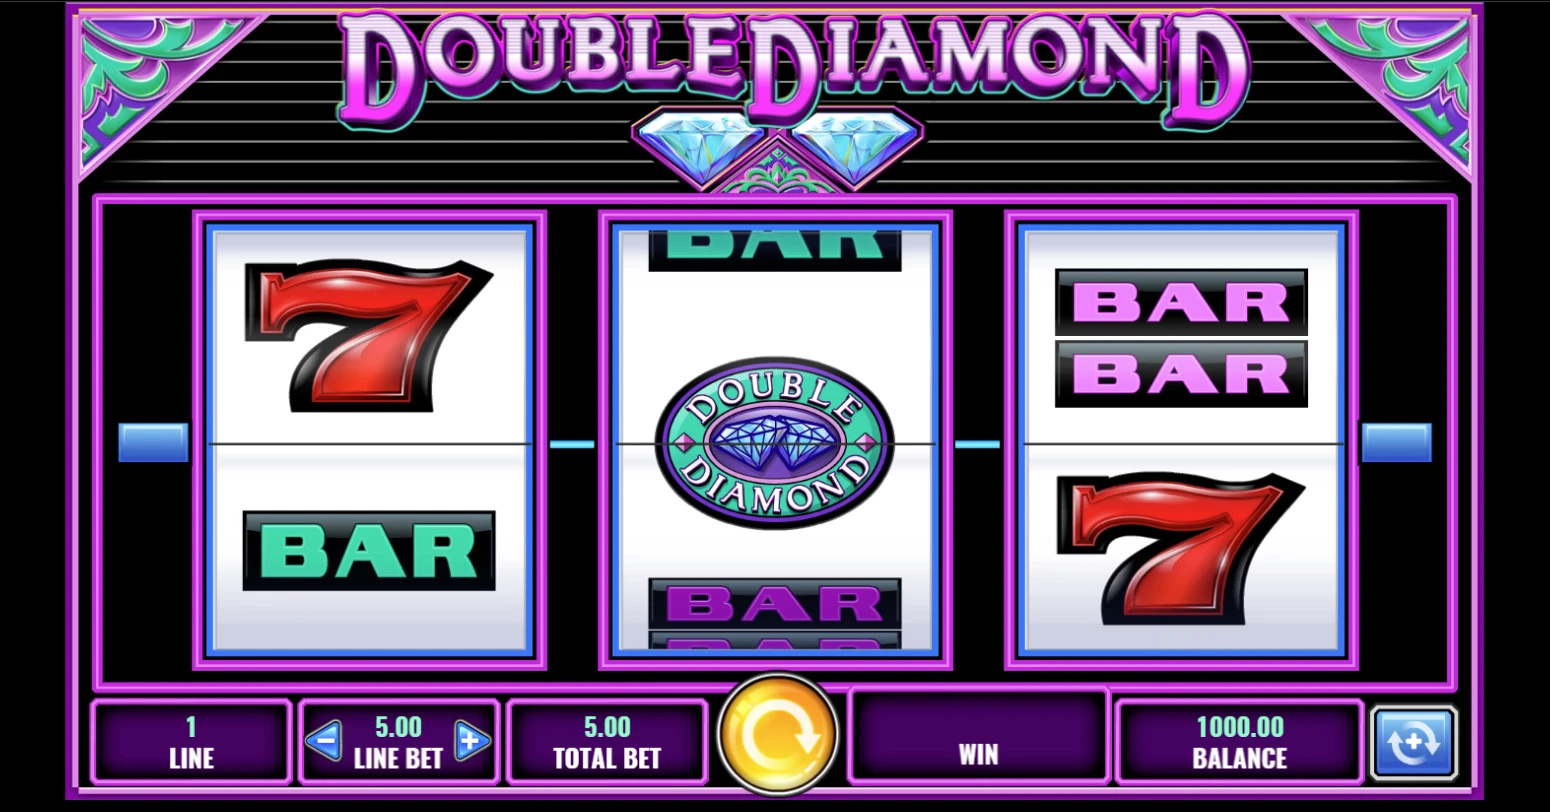 Double Diamond by IGT